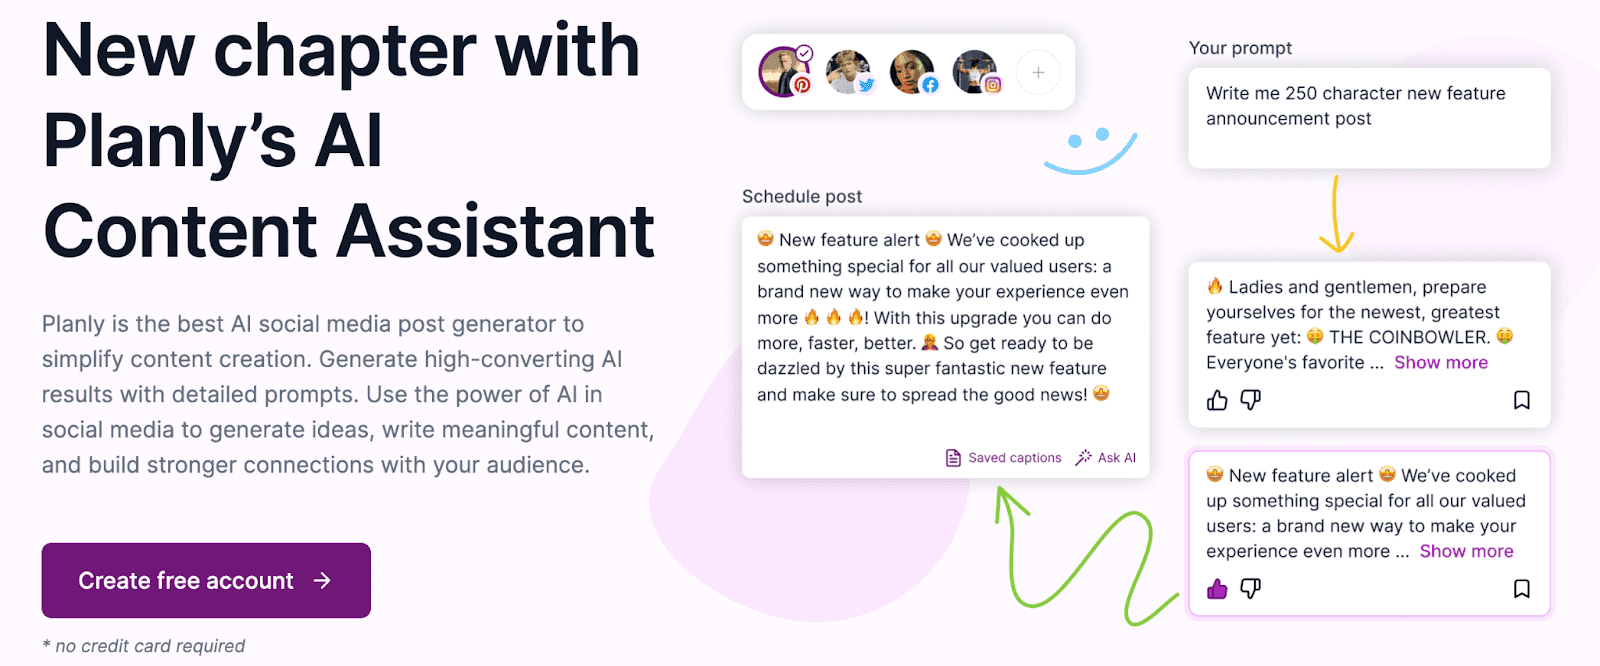 Planly website - New chapter with Planly's AI Content Assistant